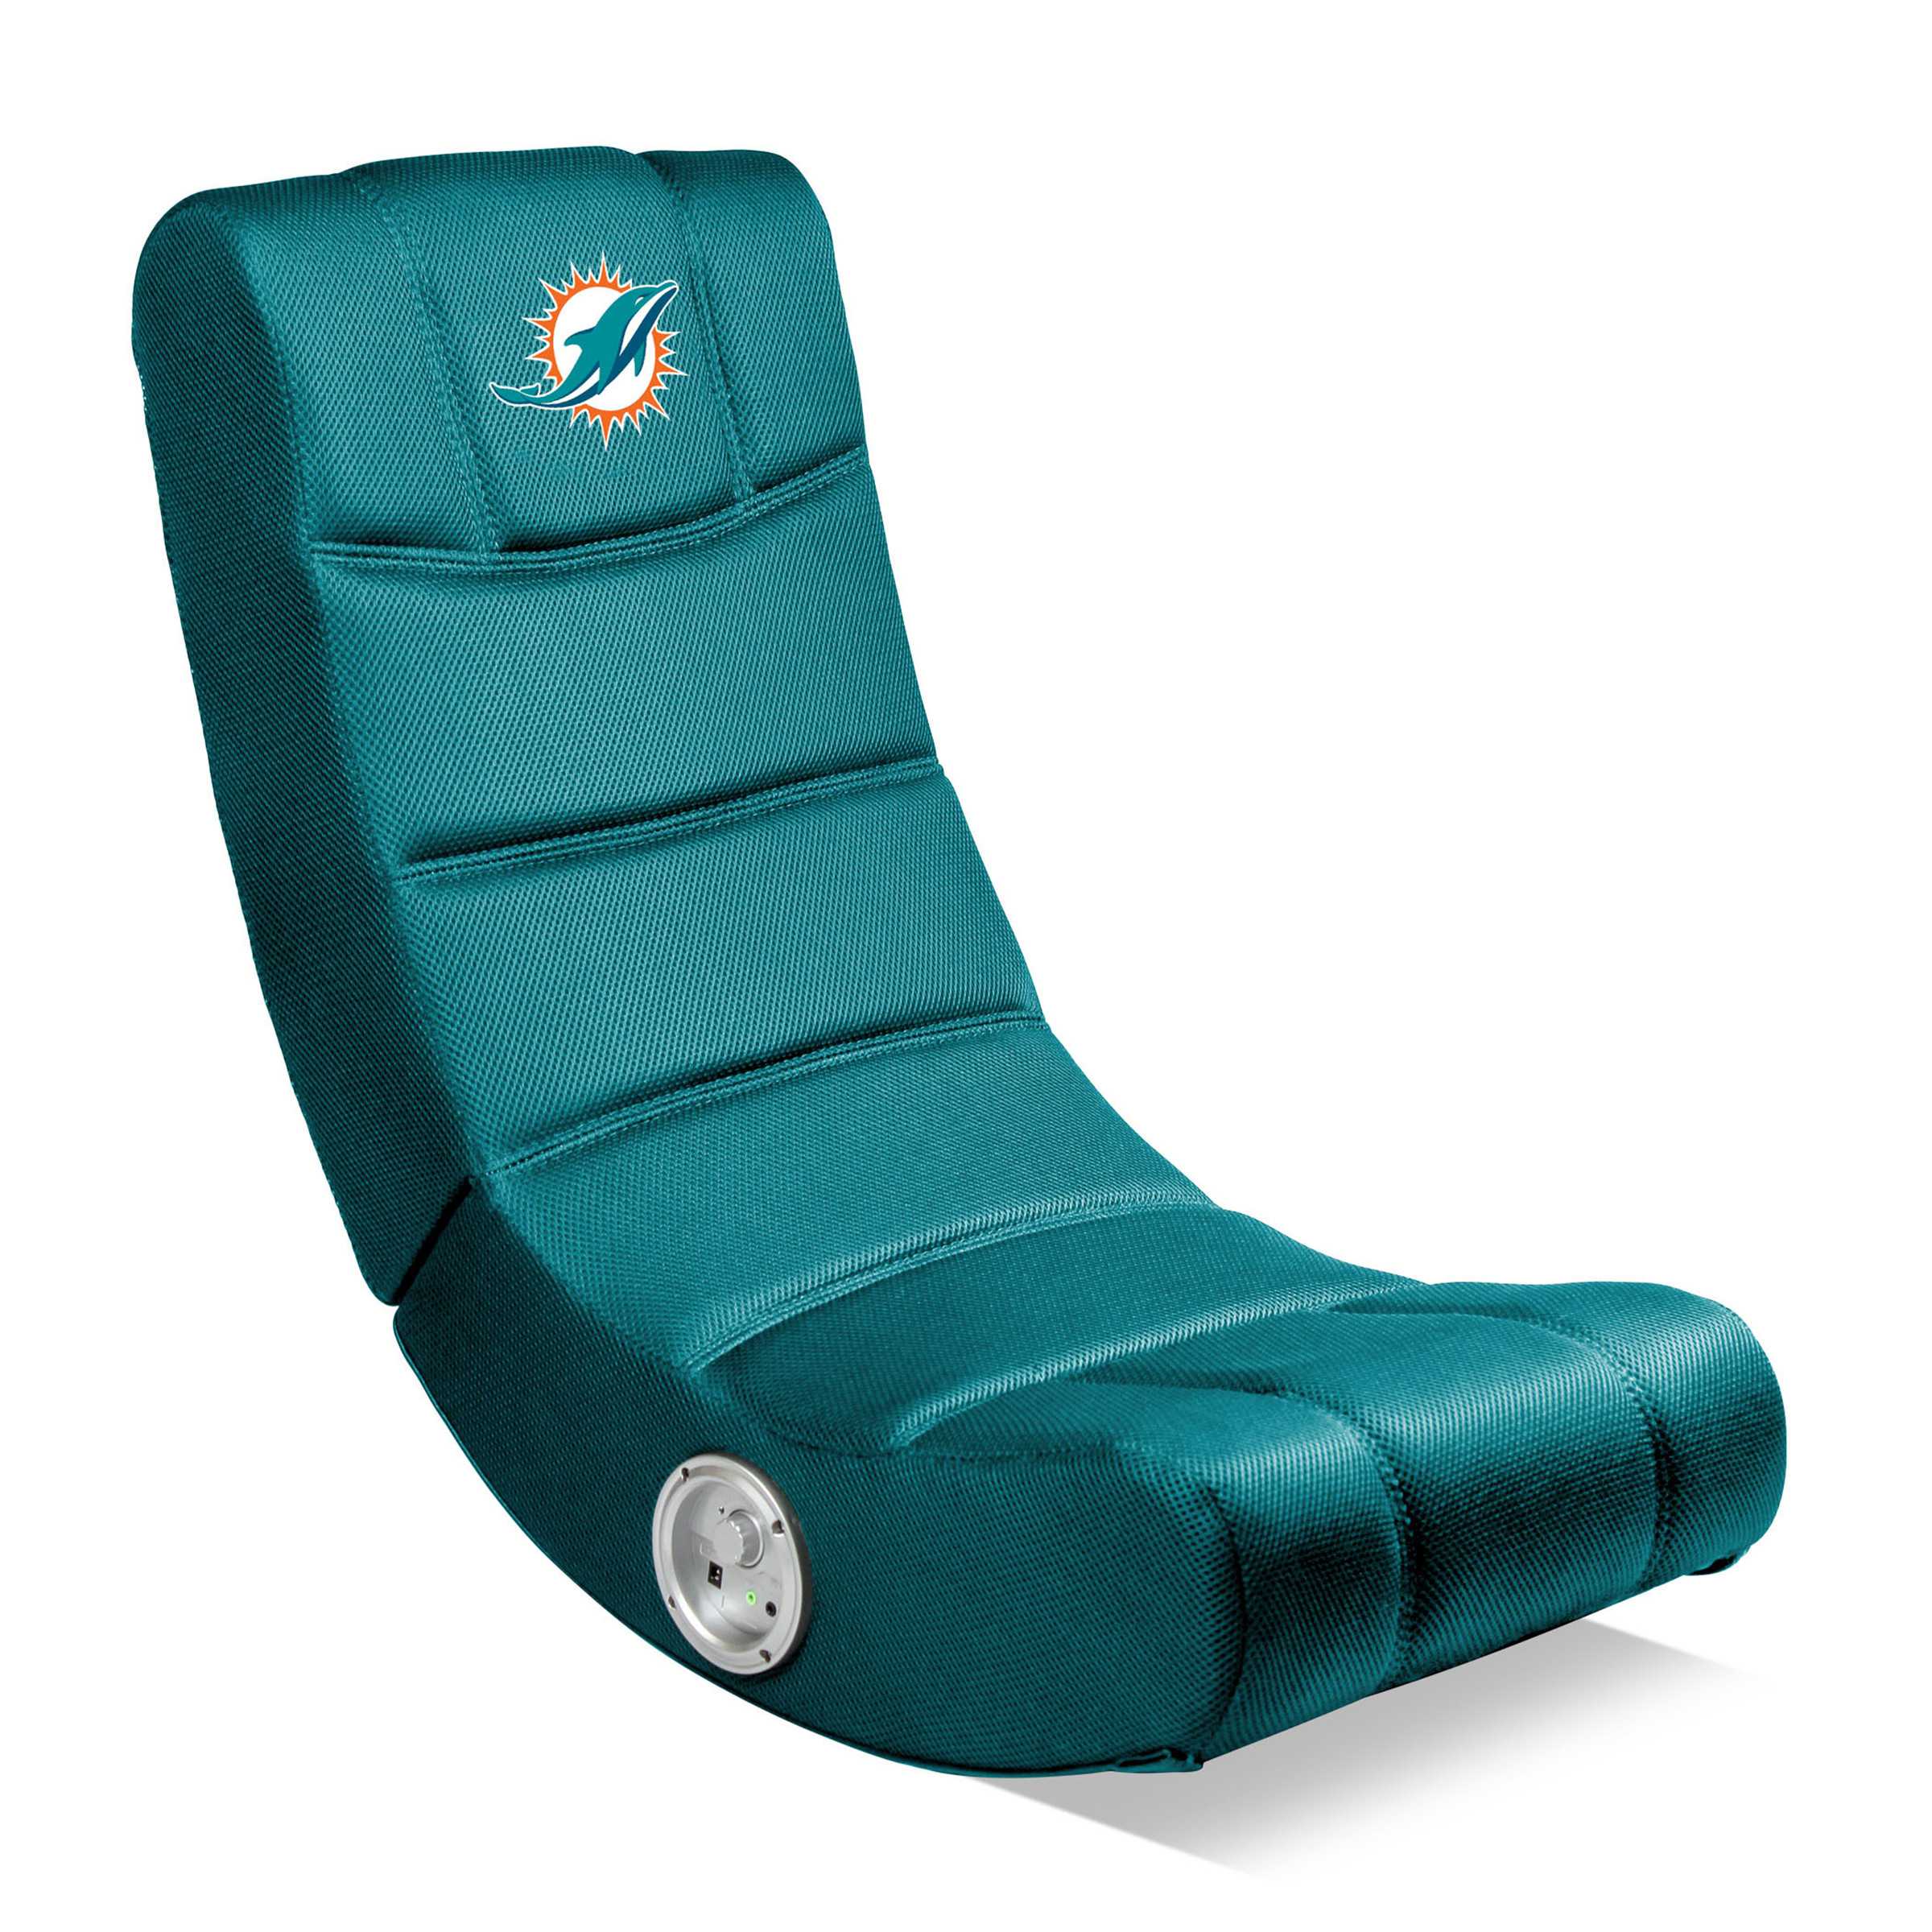 Miami Dolphins Video Chair W/ Blue Tooth